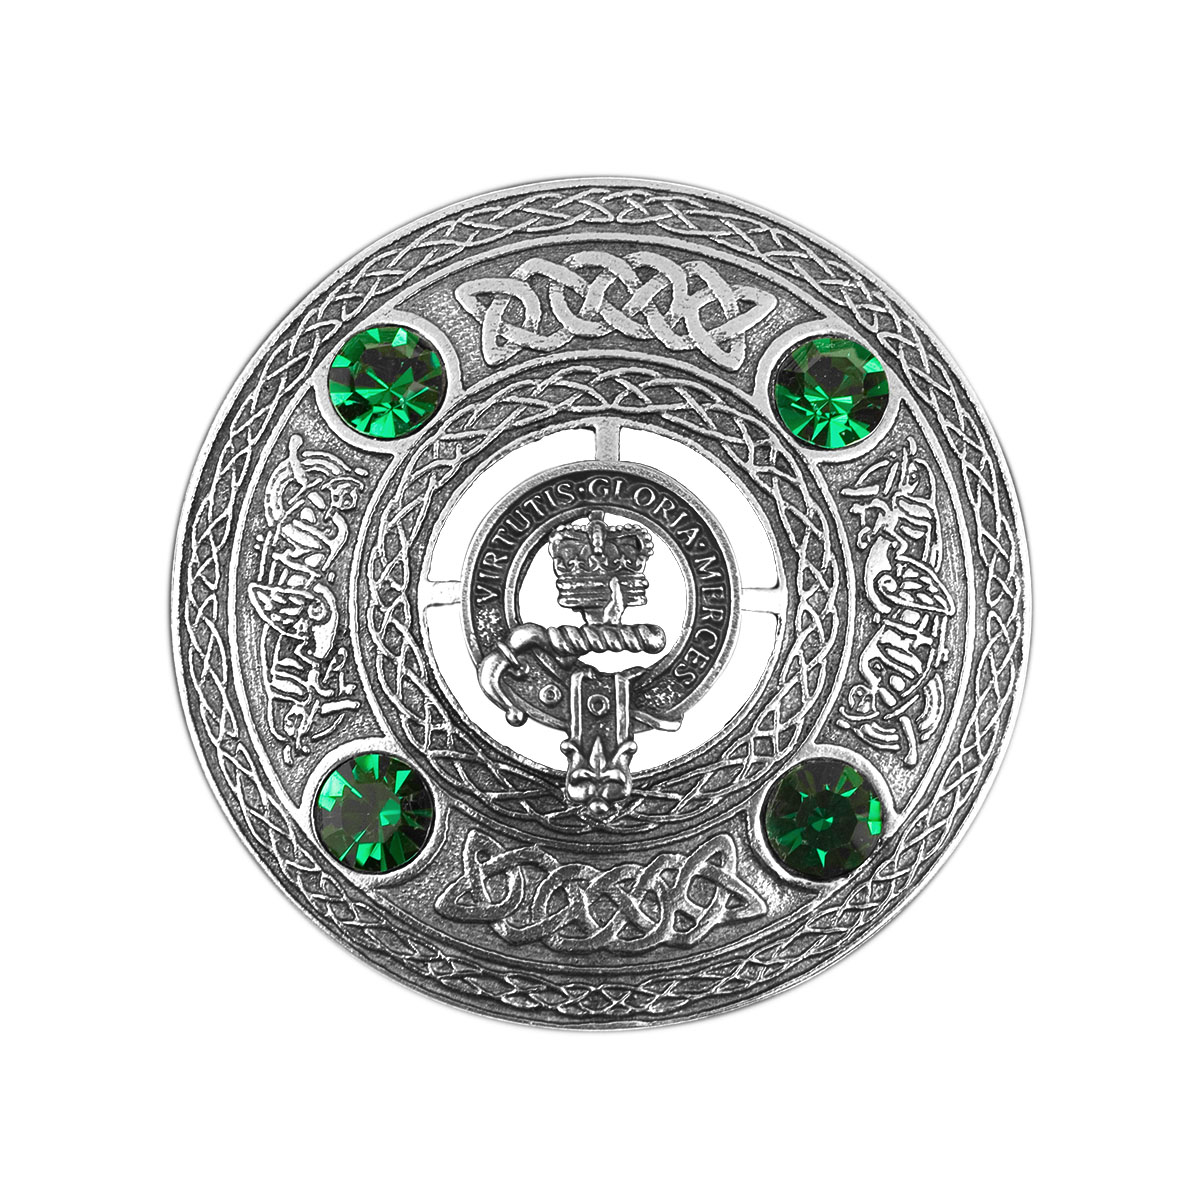 MacDougal  Scottish Clan Crest Badge Pin Brooch Style Pewter 